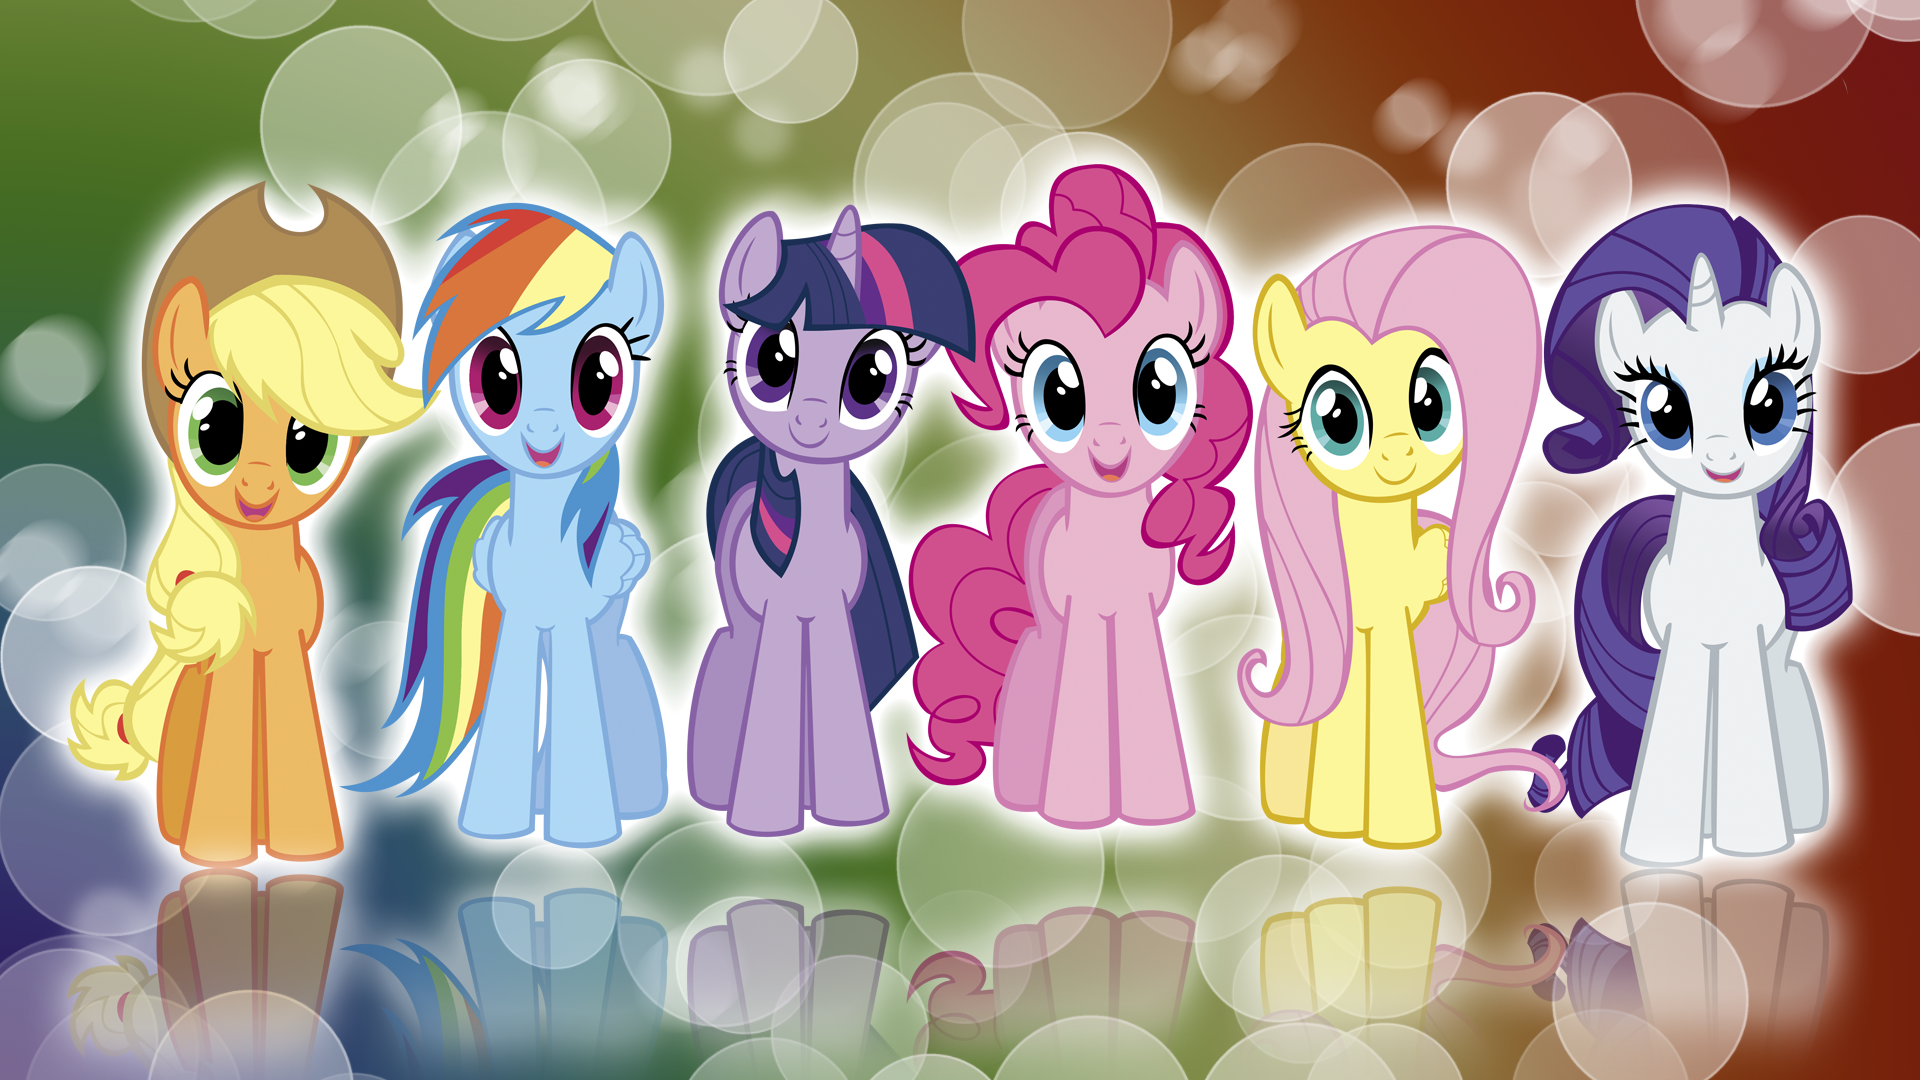 My Little Pony FIM Mane 6 'Colors!' Wallpaper by BlueDragonHans and kitsuneymg